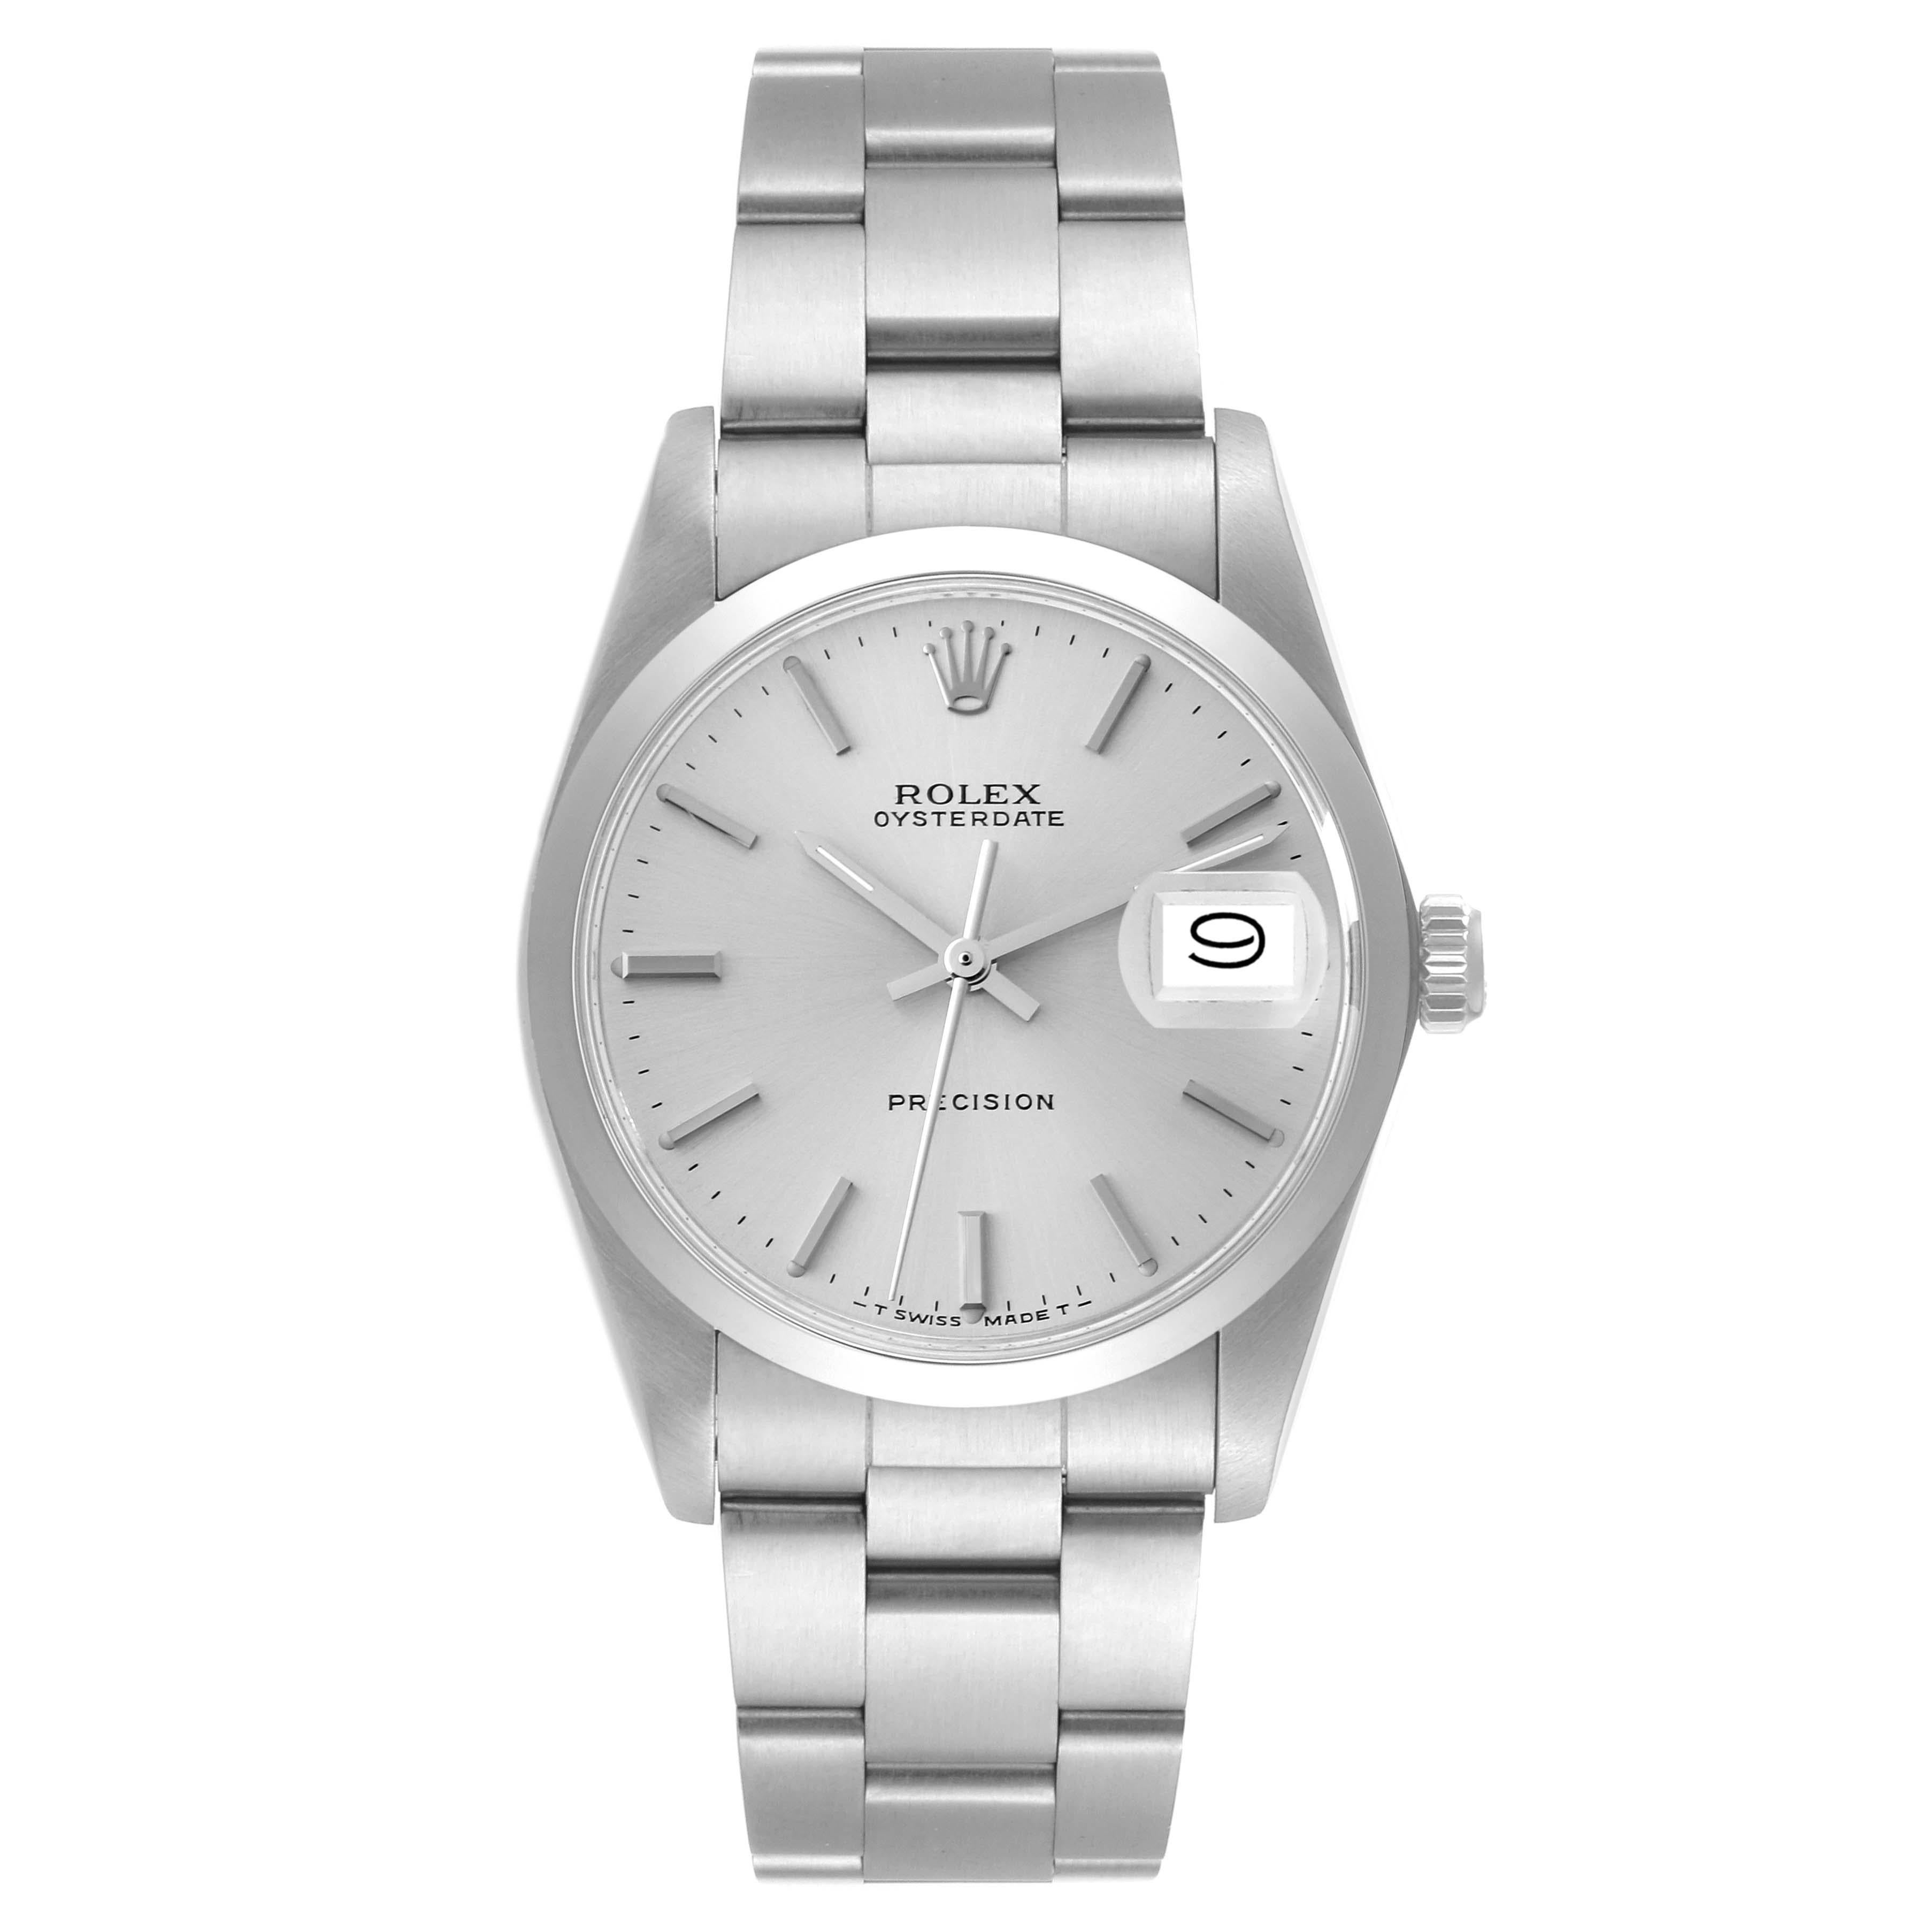 Rolex OysterDate Precision Silver Dial Vintage Steel Mens Watch 6694. Manual-winding movement. Stainless steel oyster case 35.0 mm in diameter. Rolex logo on the crown. Stainless steel smooth bezel. Acrylic crystal with cyclops magnifier. Silver